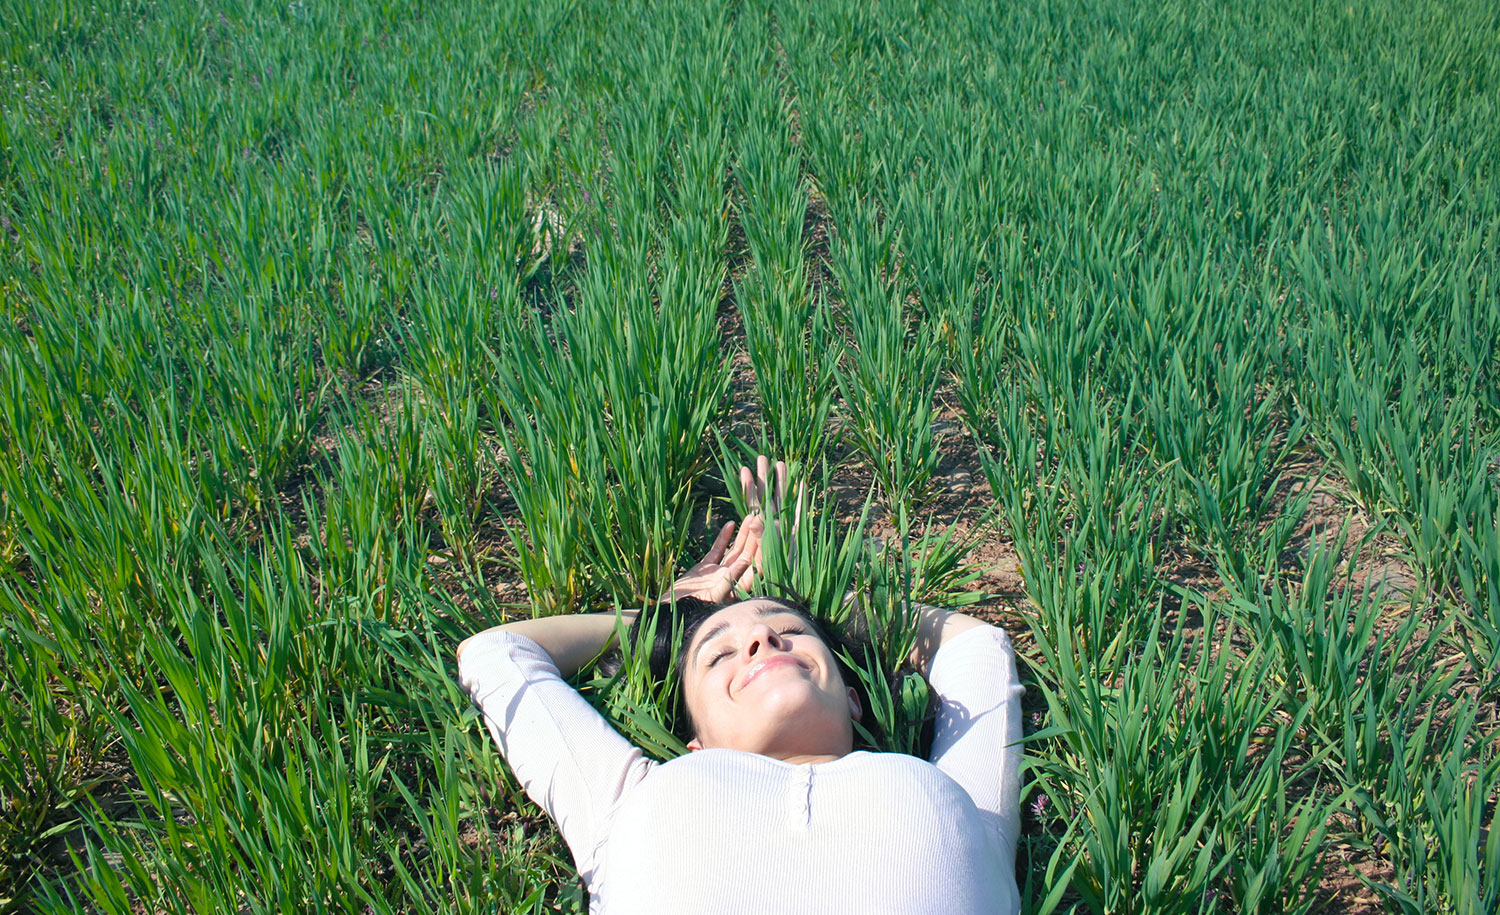 A highly sensitive person lies in the grass